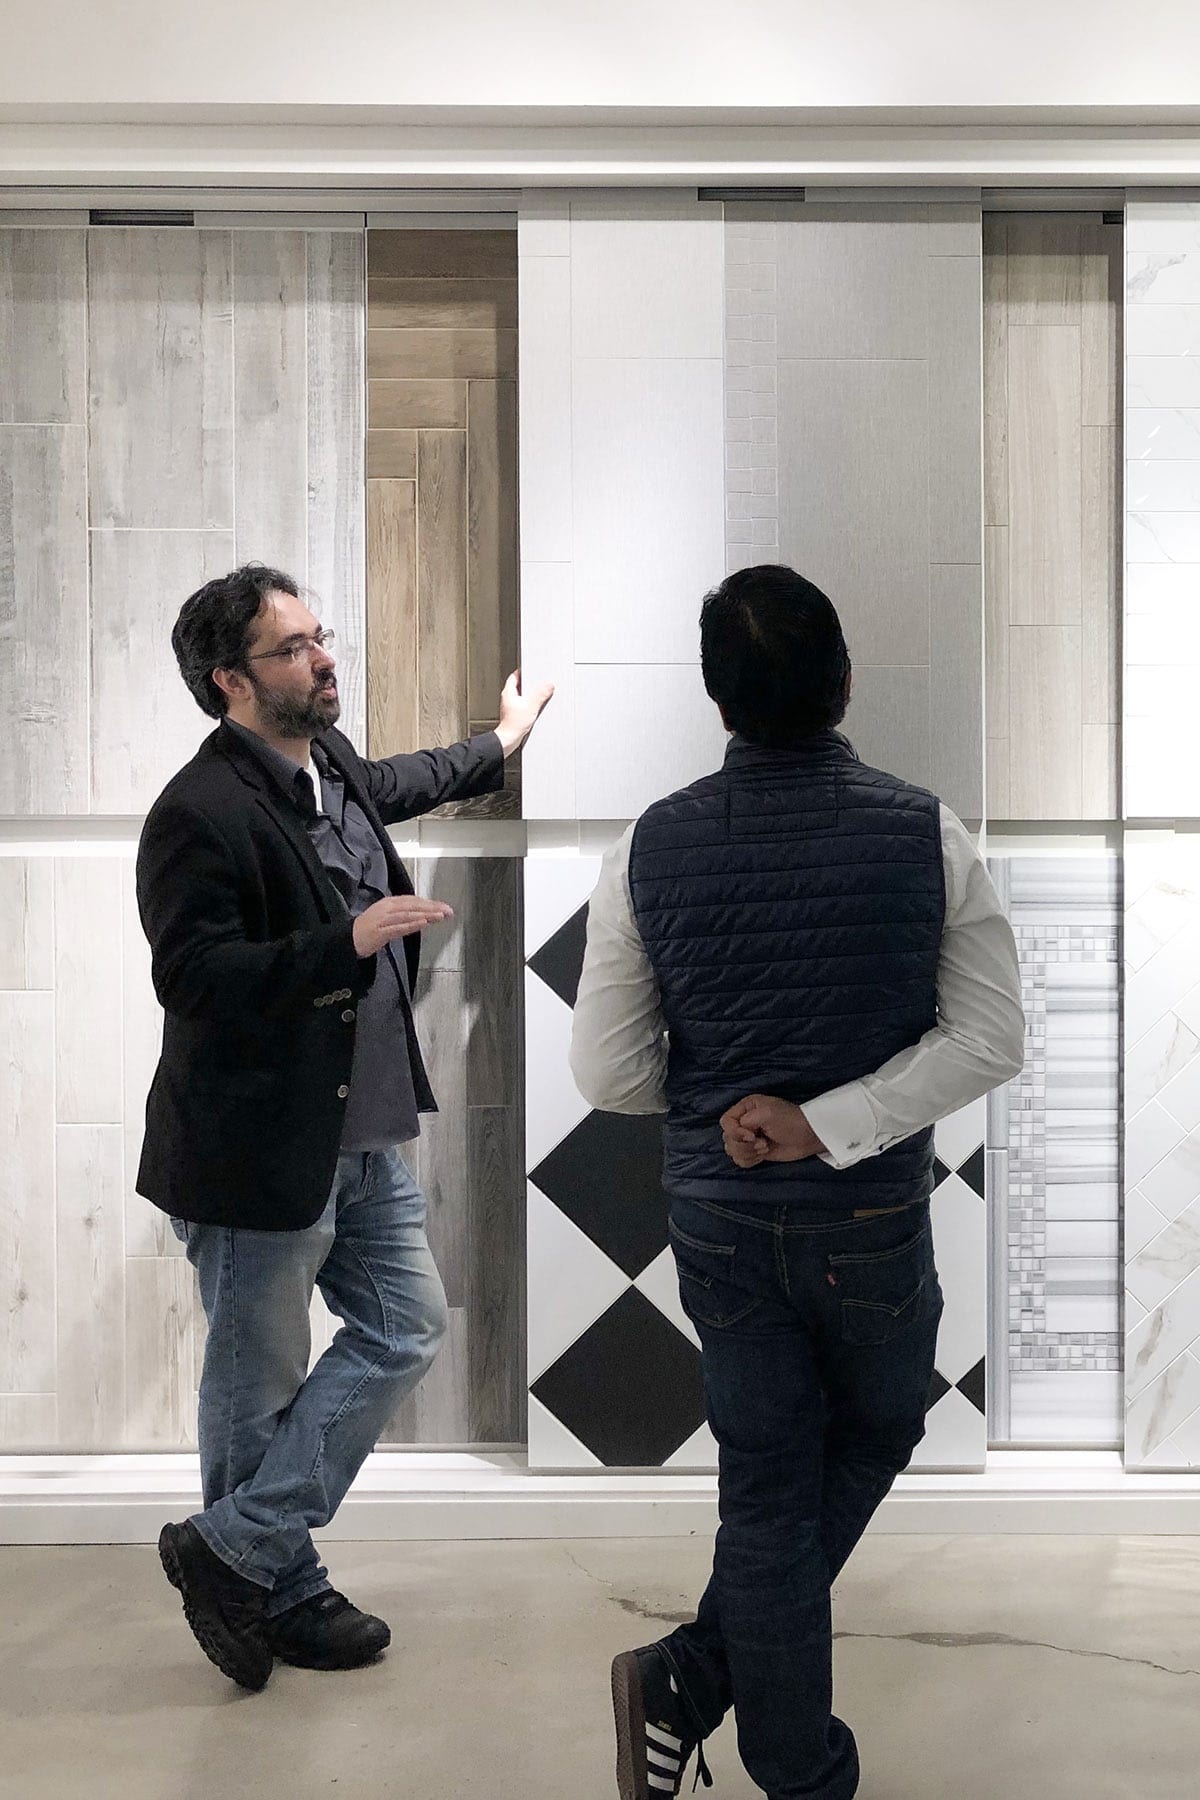 Architect Jorge Fontan and client at a showroom